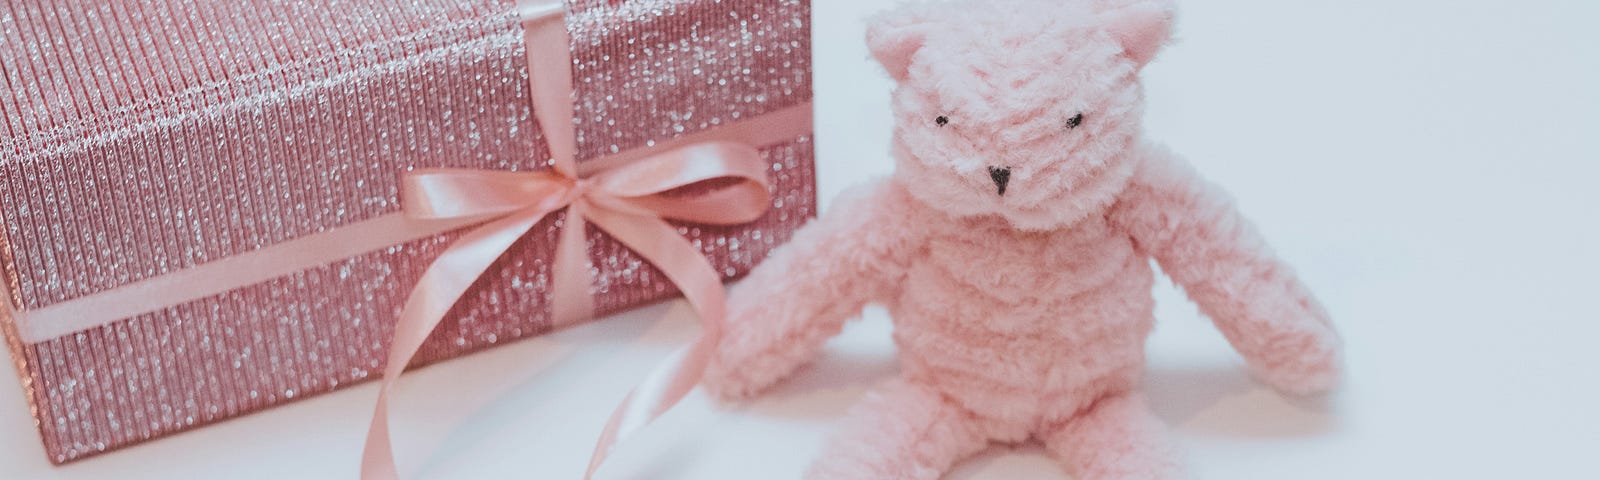 A plush pink teddy bear sits next to a dazzling pink-wrapped gift.